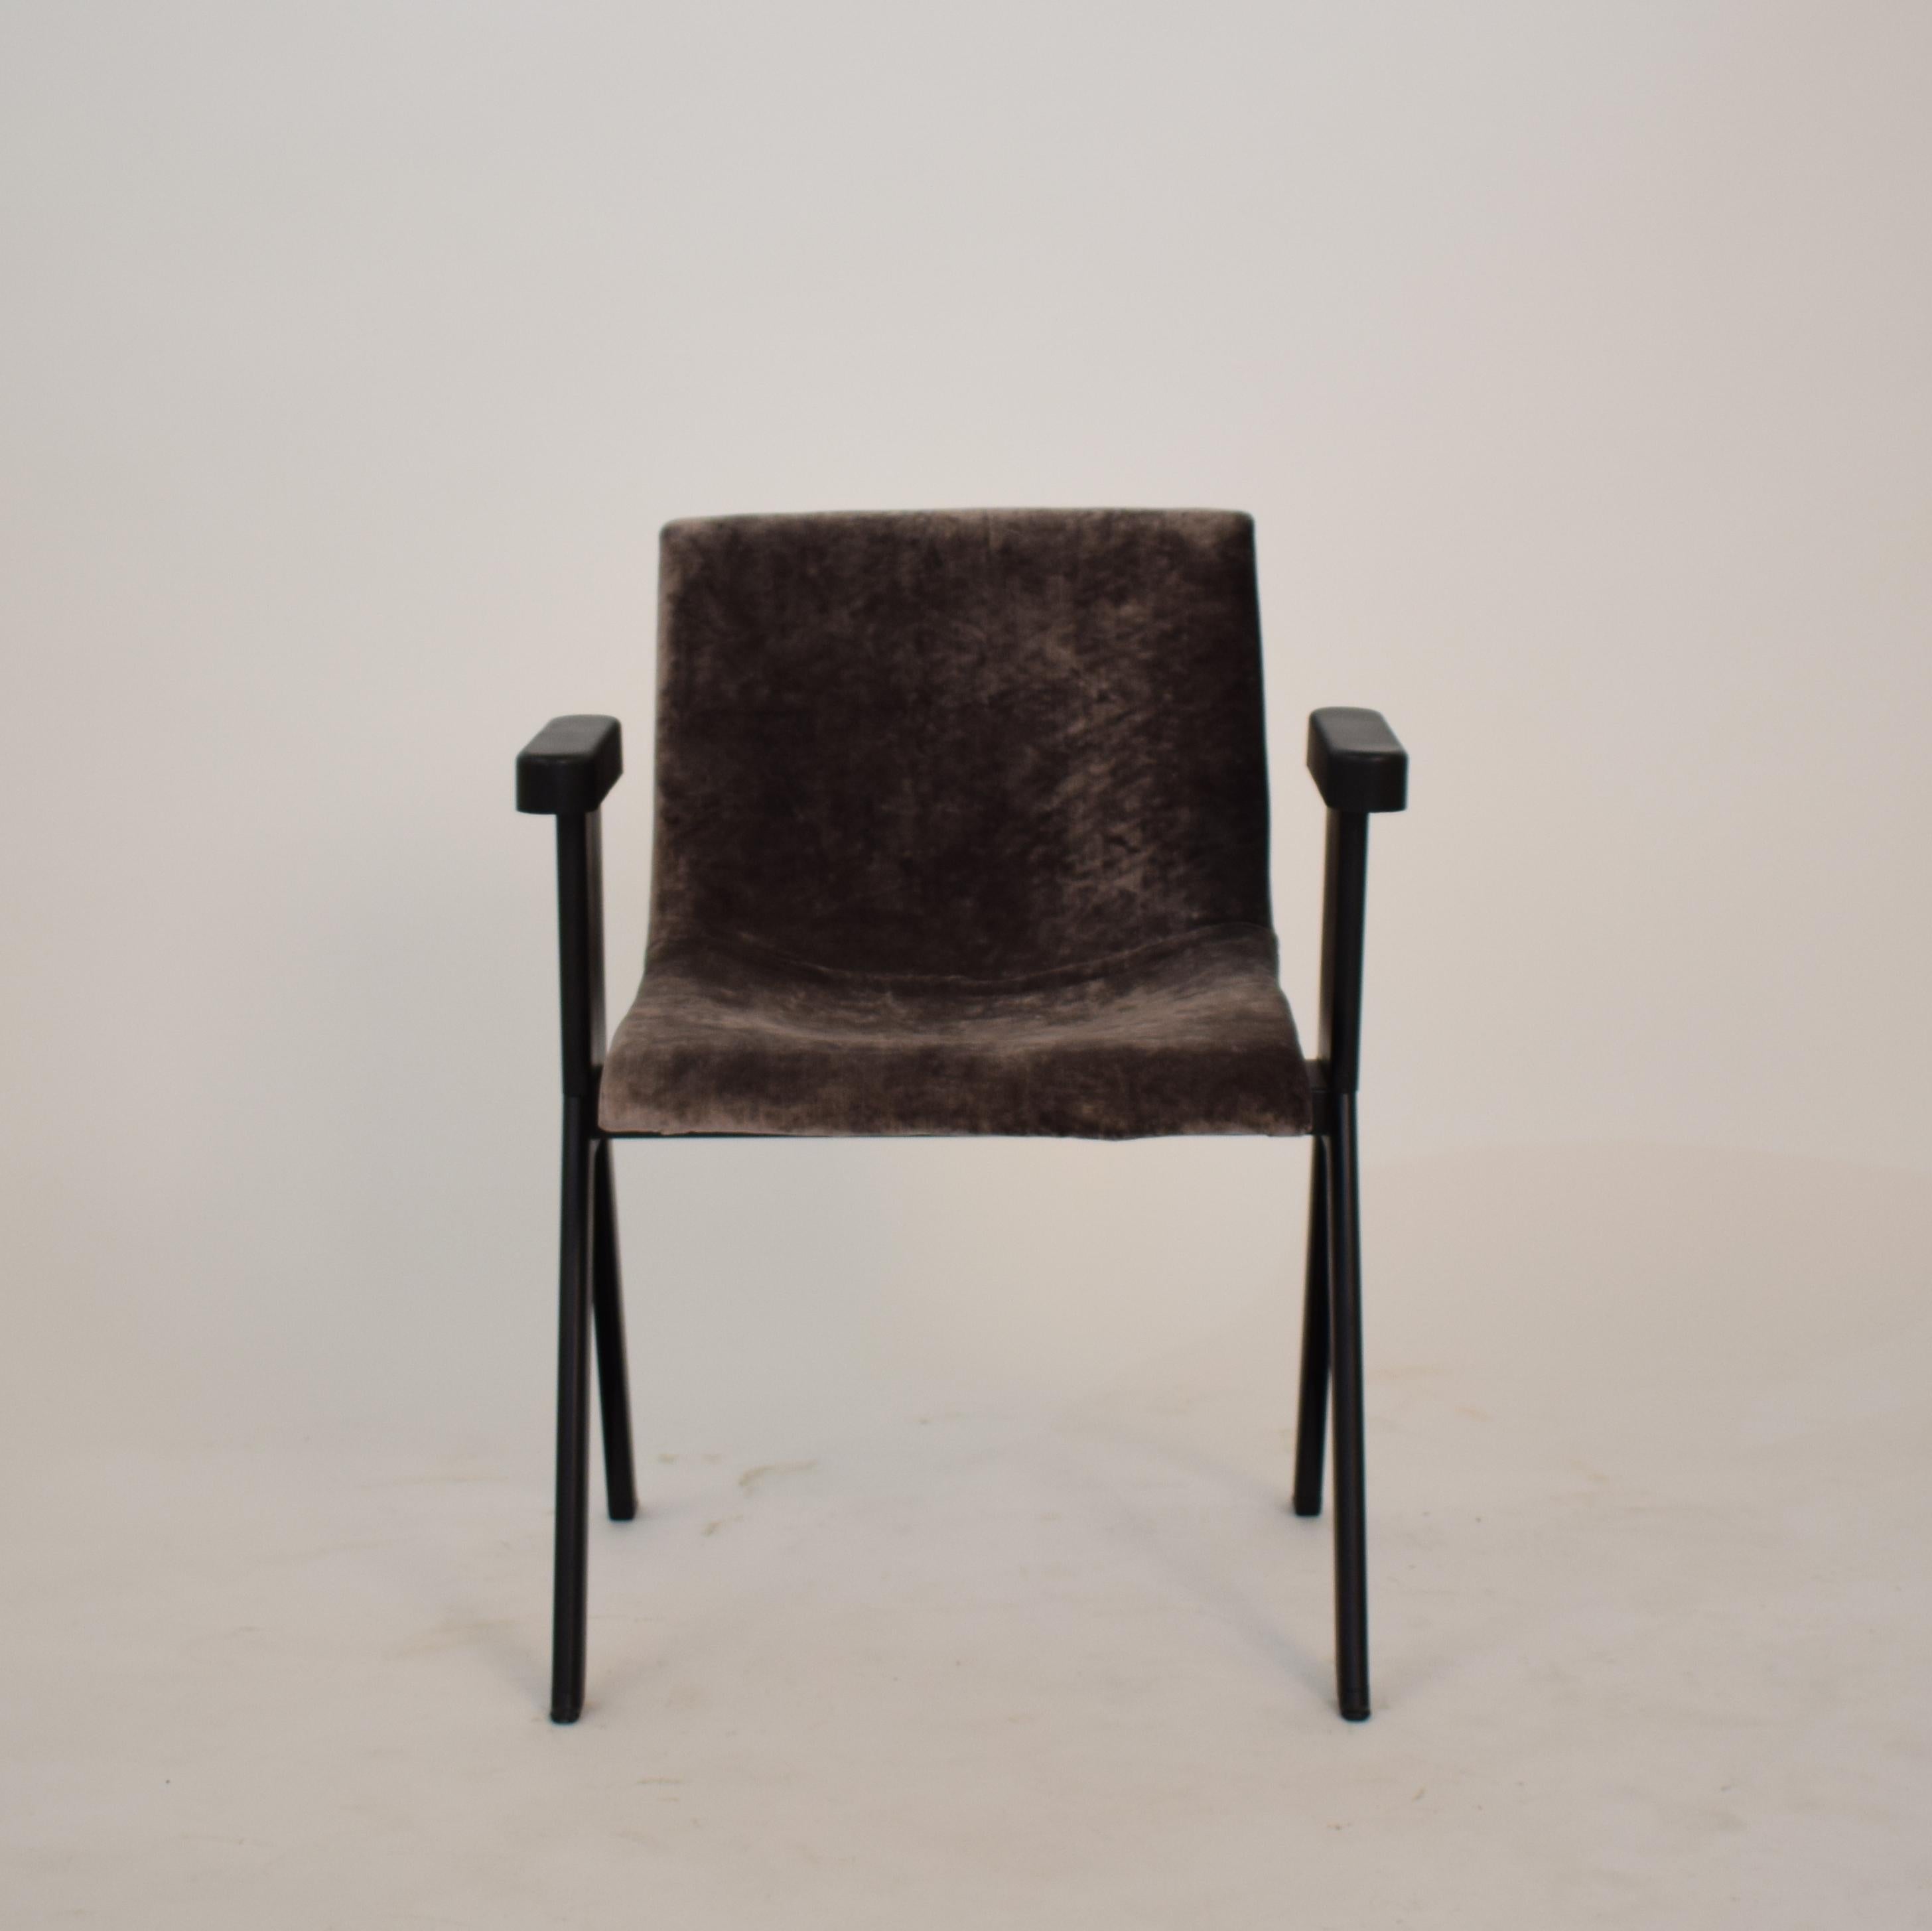 This elegant midcentury Italian armchair by Olivetti Synthesis was produced in the 1960s.
It has a black base and it is reupholstered in grey / violet velvet.
A unique piece which is a great eye-catcher for your antique, modern, space age or